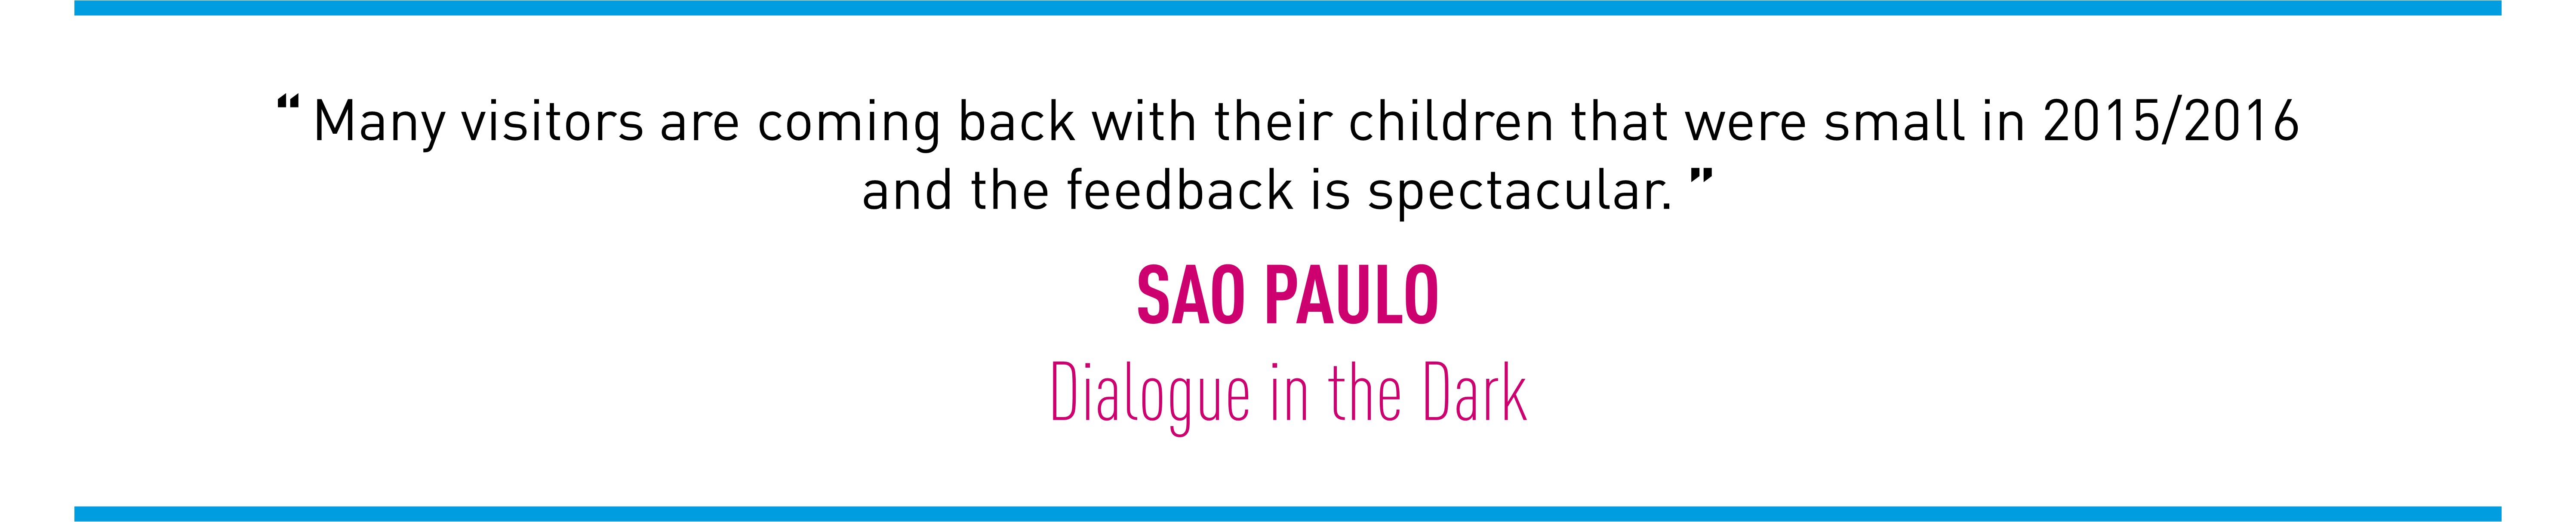 Many visitors are coming back with their children that were small in 2015/2016and the feedback is spectacular. (SAO PAULO Dialogue in the Dark)